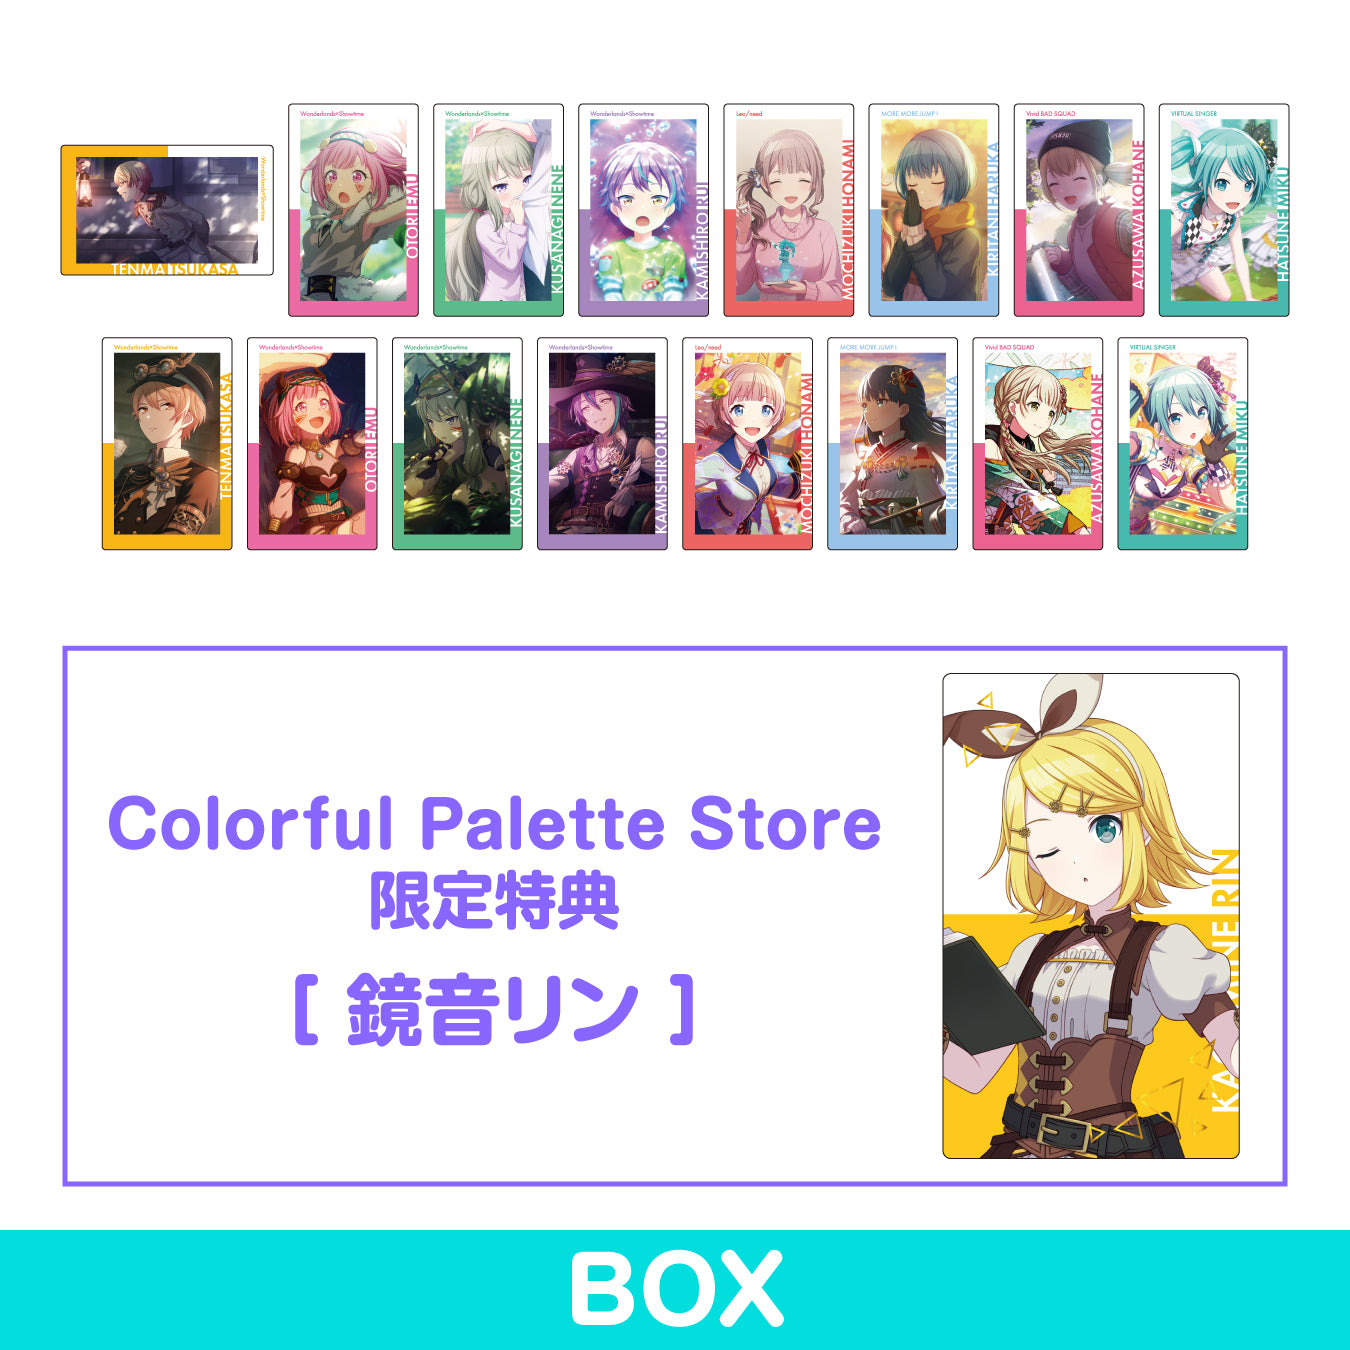 –　series　Store　BOX　Colorful　vol.8　A　予約商品】ePick　Palette　card　特典付き［鏡音リン］